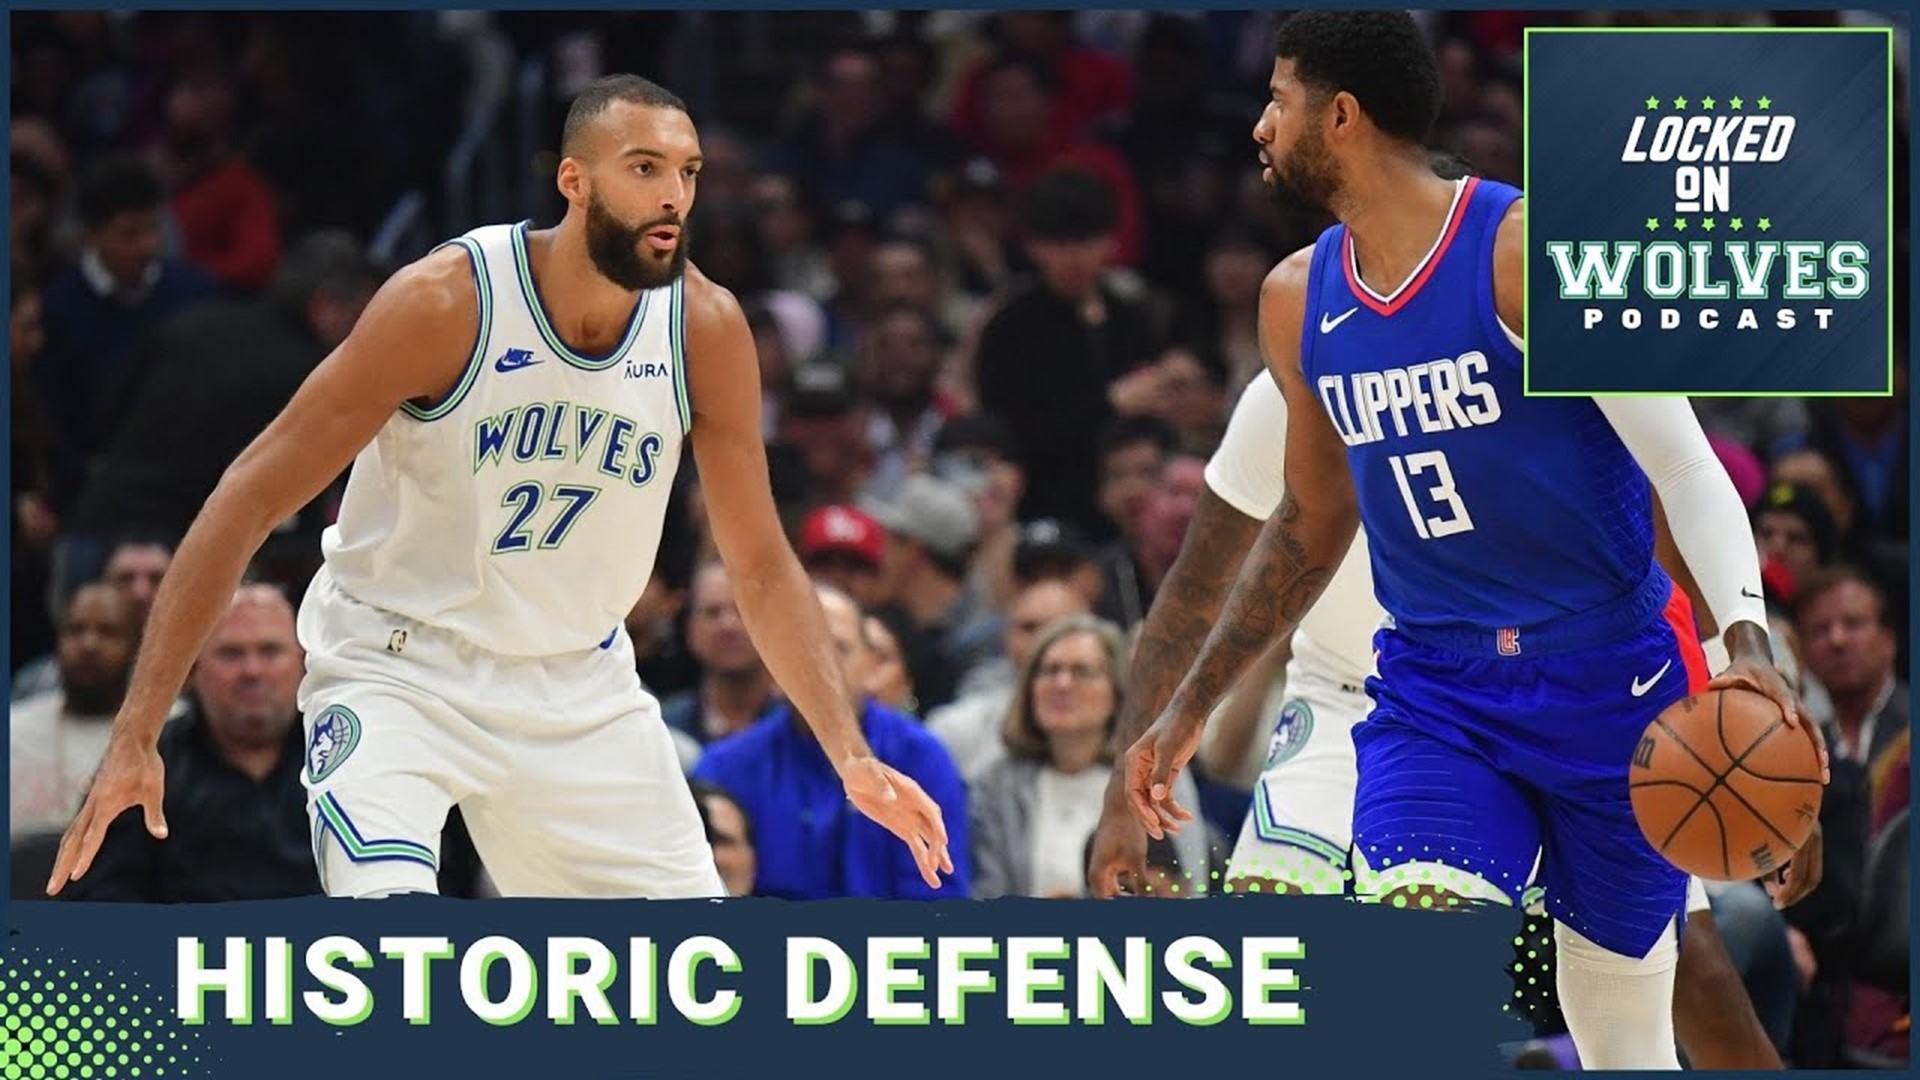 The Minnesota Timberwolves defense is historically impressive + Wolves' improving offense